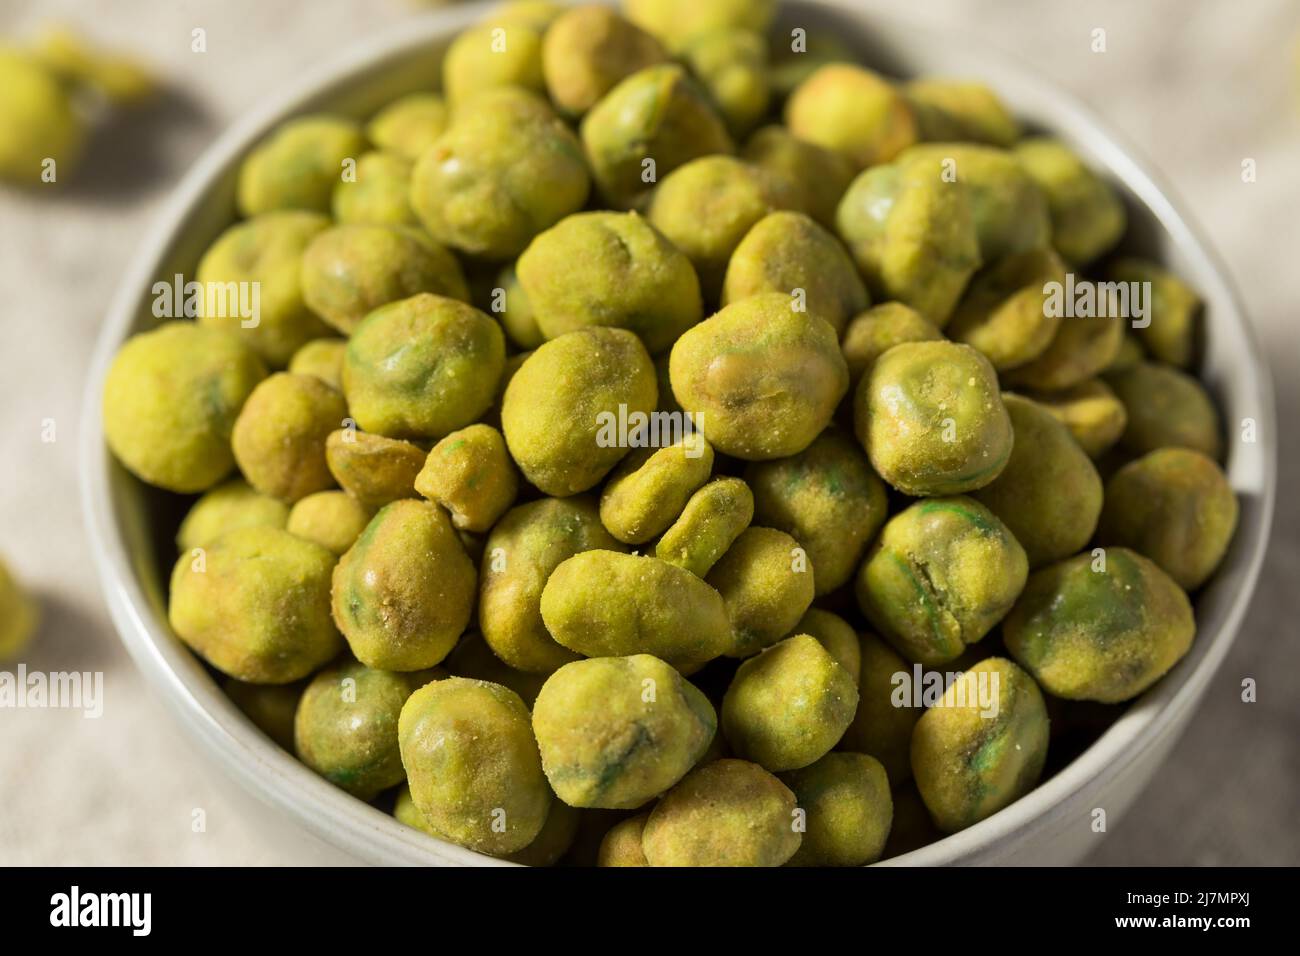 Spicy Japanese Wasabi Peas in a Bowl Stock Photo - Alamy